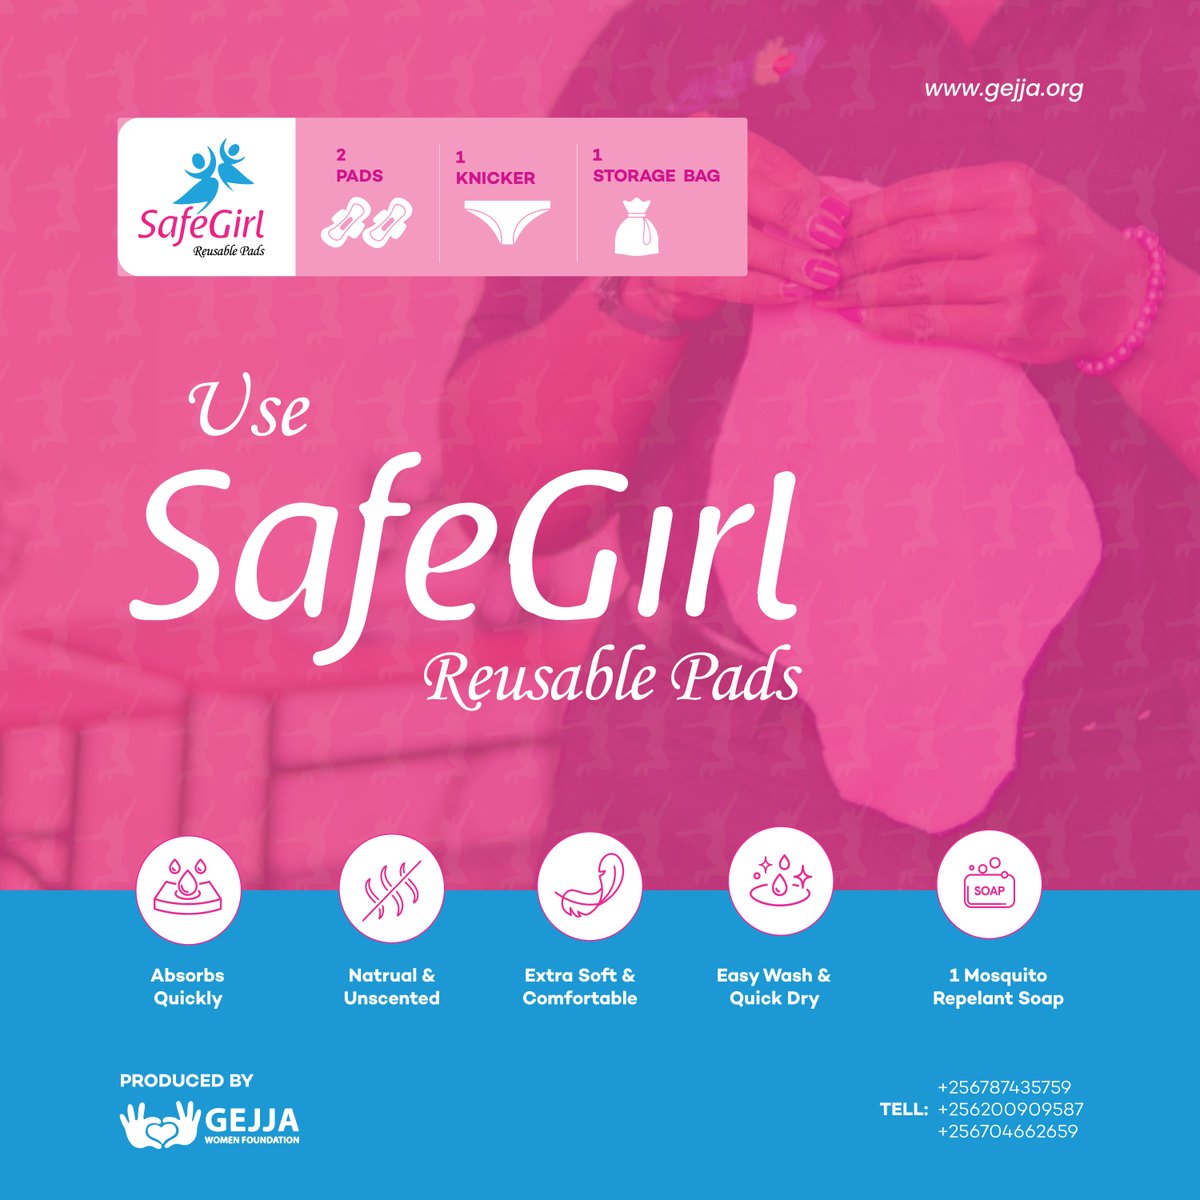 Traditional pads are not only uncomfortable but also harmful to the environment. Try our Safe Girl Reusable Sanitary Pads today and embrace comfort, confidence, and sustainability every month.

Tel: +256787435759 | +256200909587 | +256704662659
#SafeGirl #ReusablePads